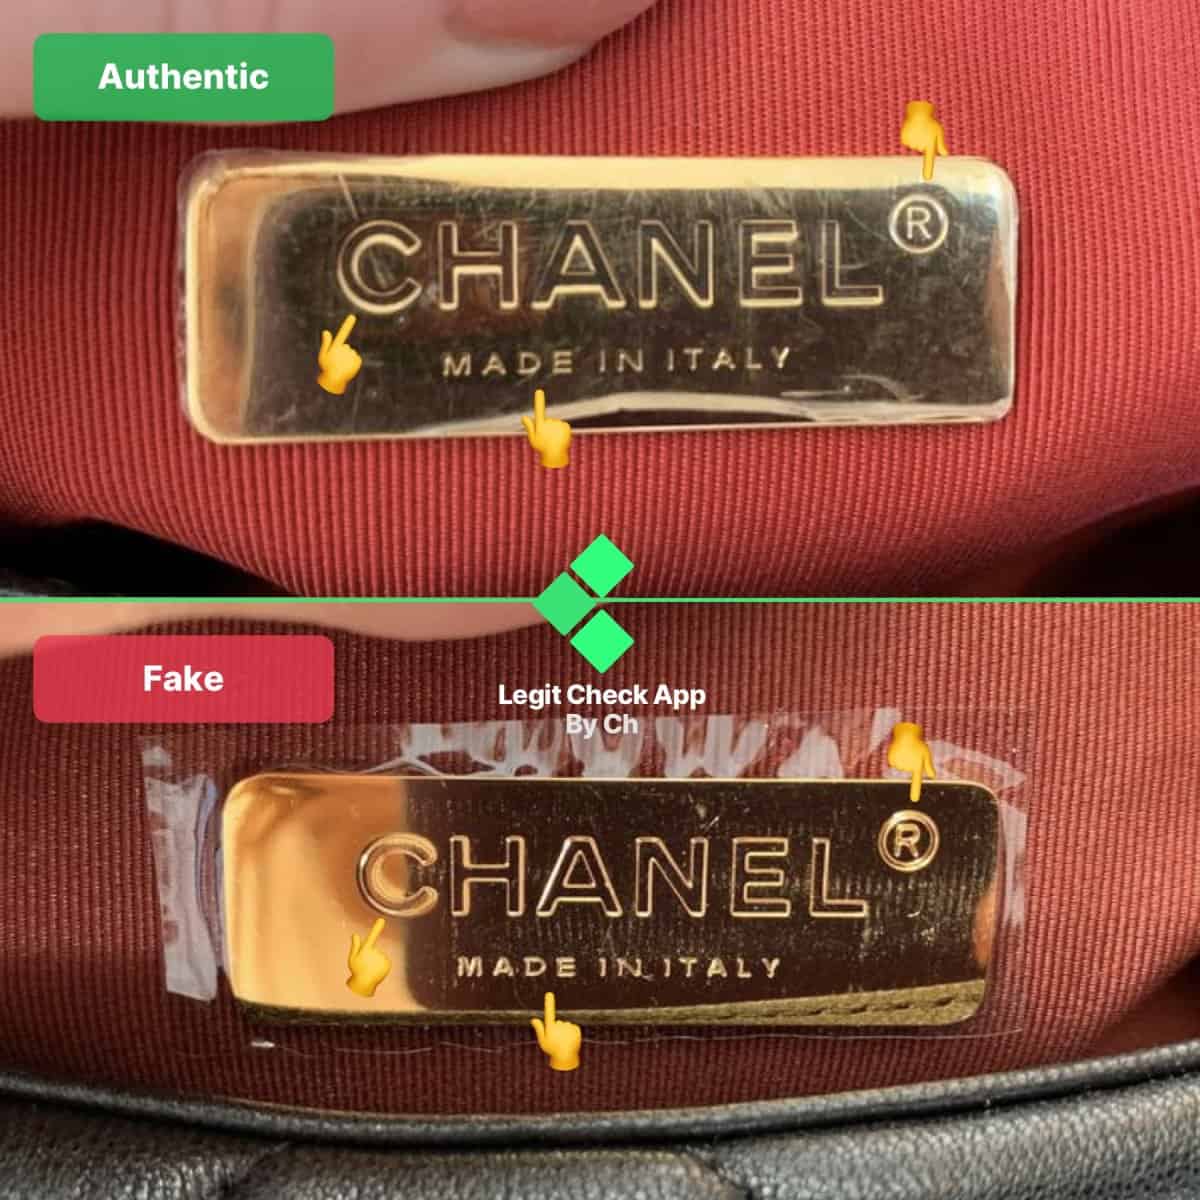 How To Spot Fake Chanel 19 Bags (Real Vs Fake) - Legit Check By Ch